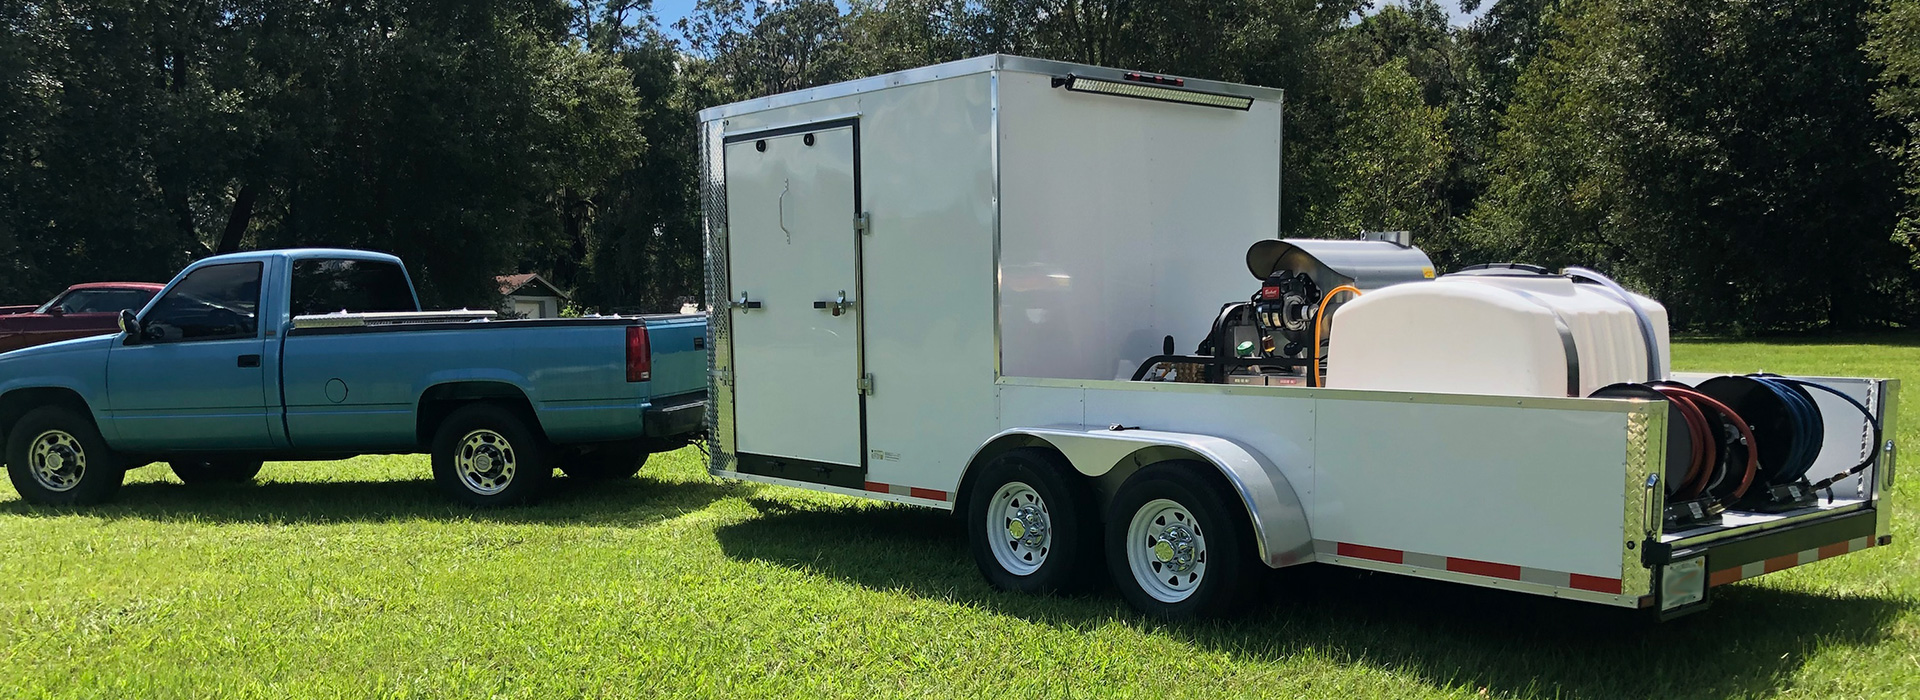 Abel Hood Cleaning truck and trailer